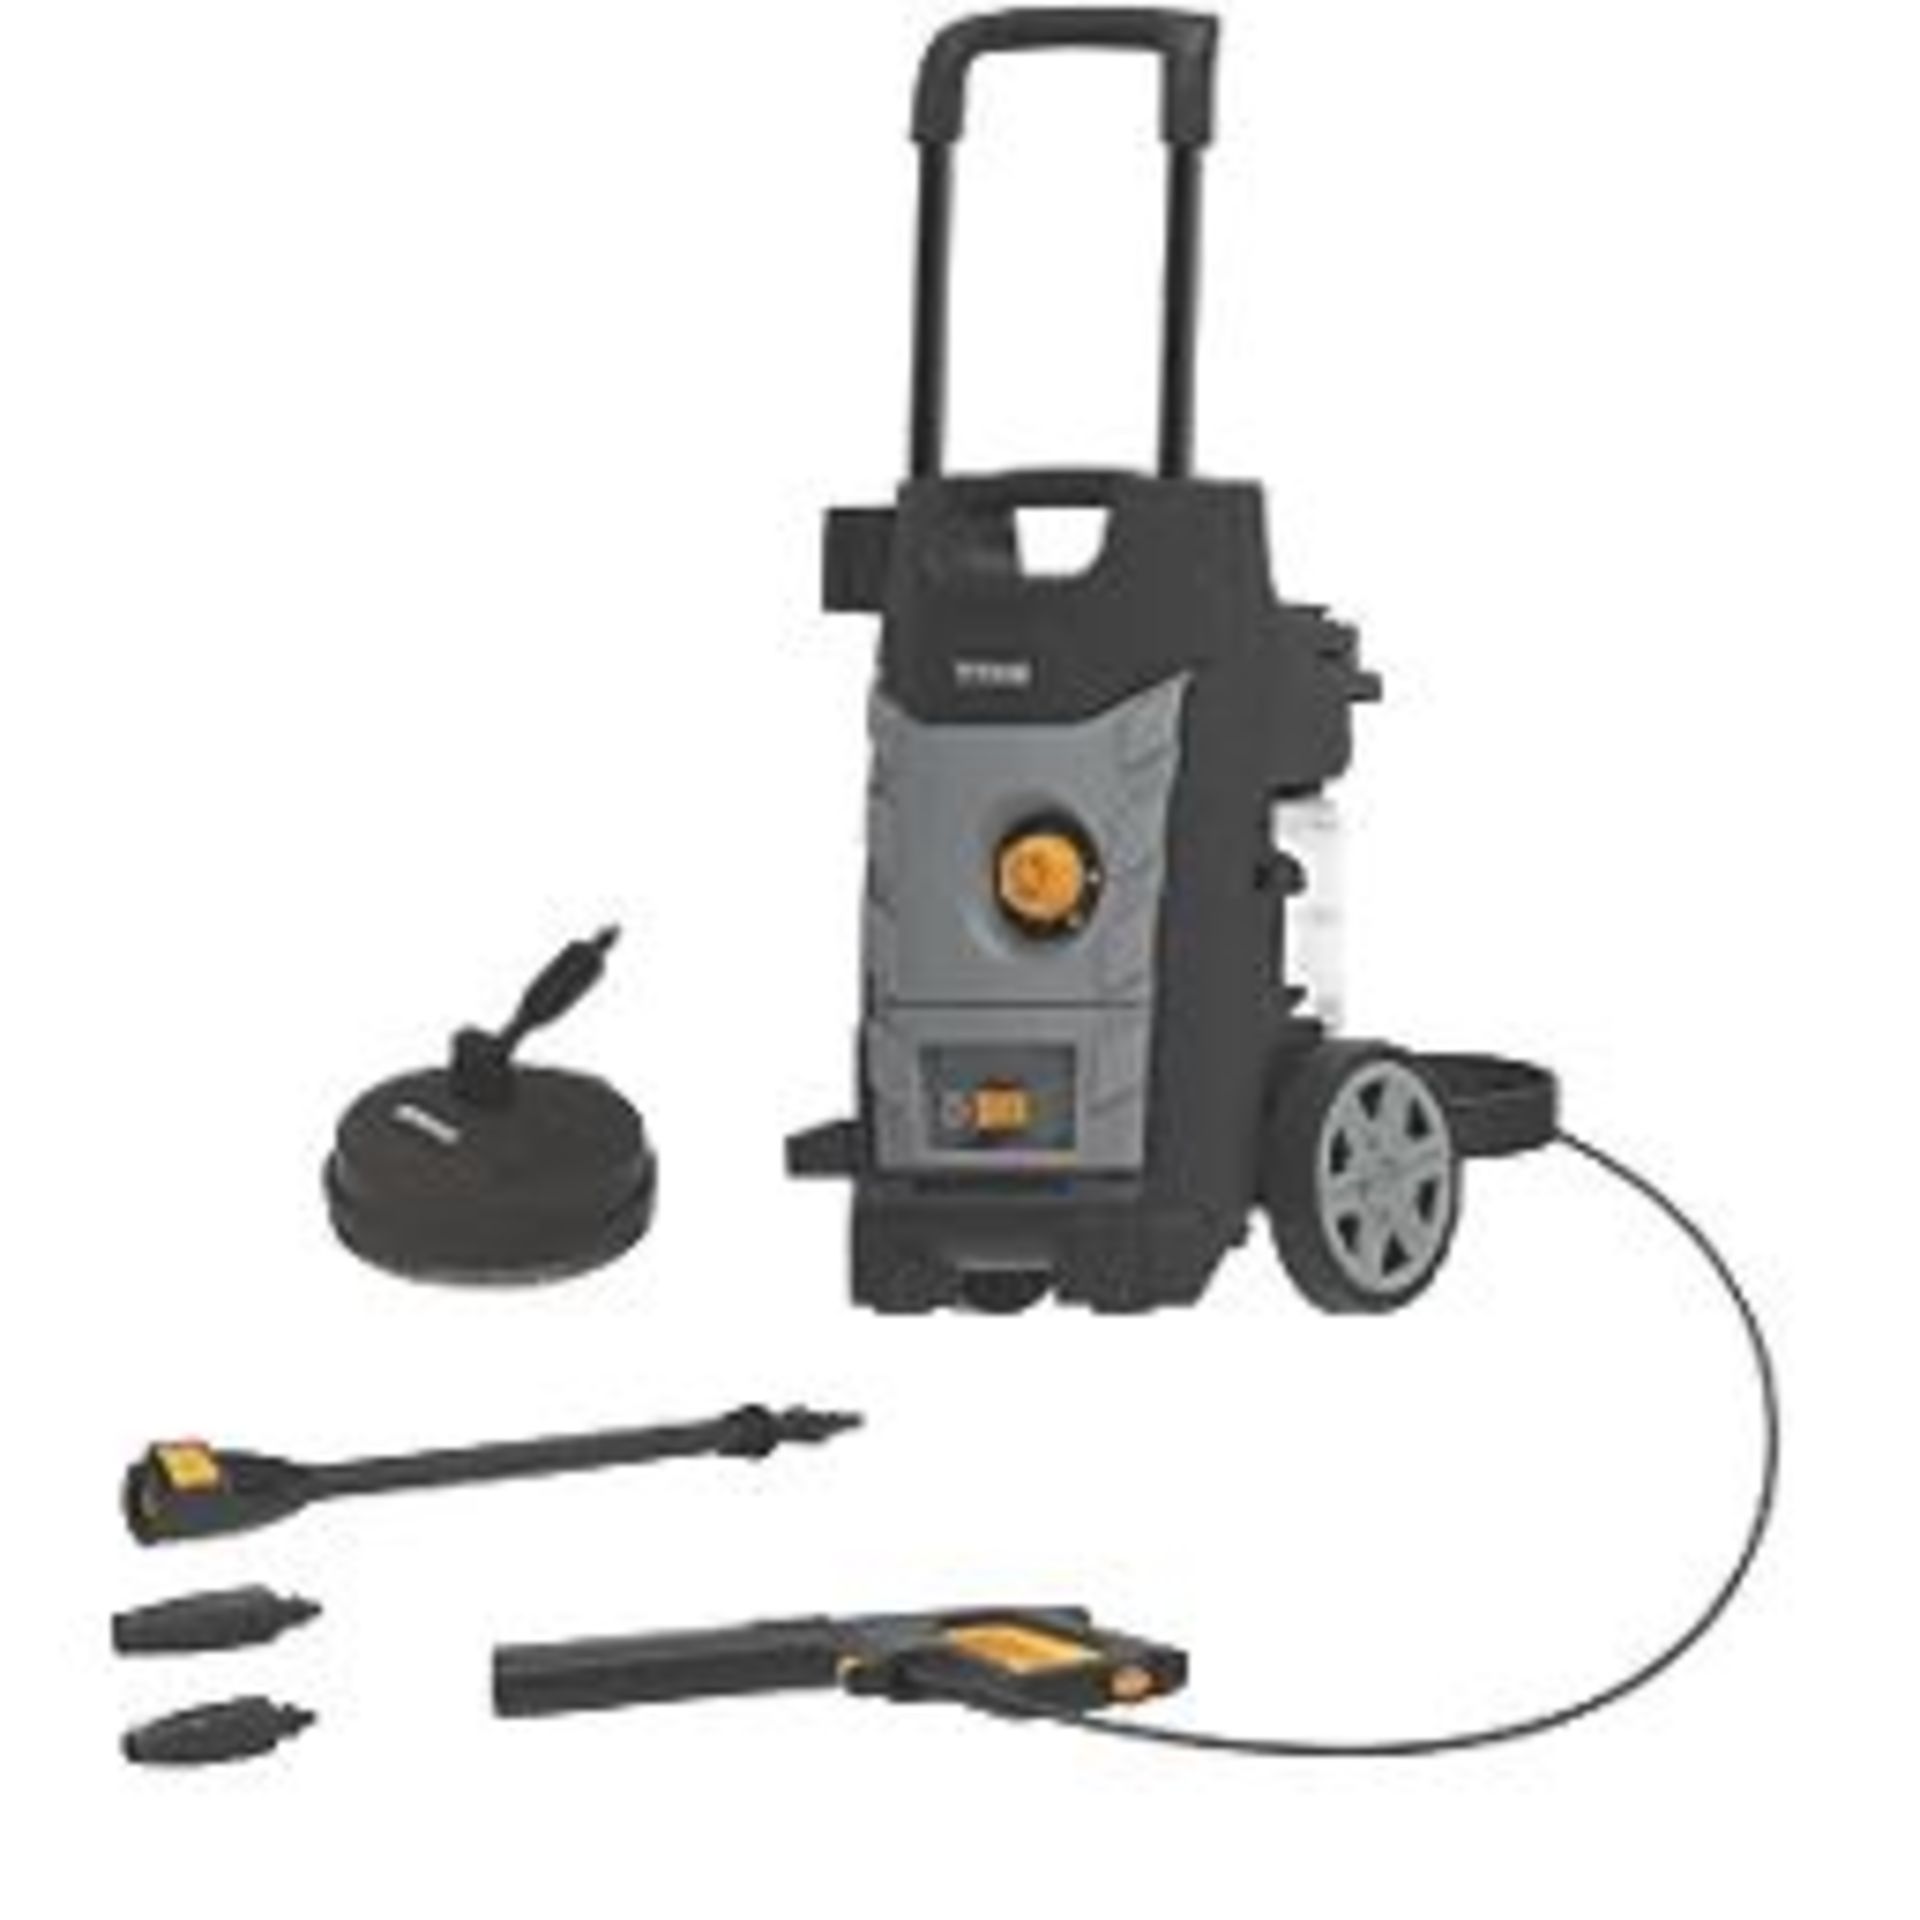 TITAN TTB1800PRW 140BAR ELECTRIC HIGH PRESSURE WASHER 1.8KW 230V . - S2. Compact design with space-